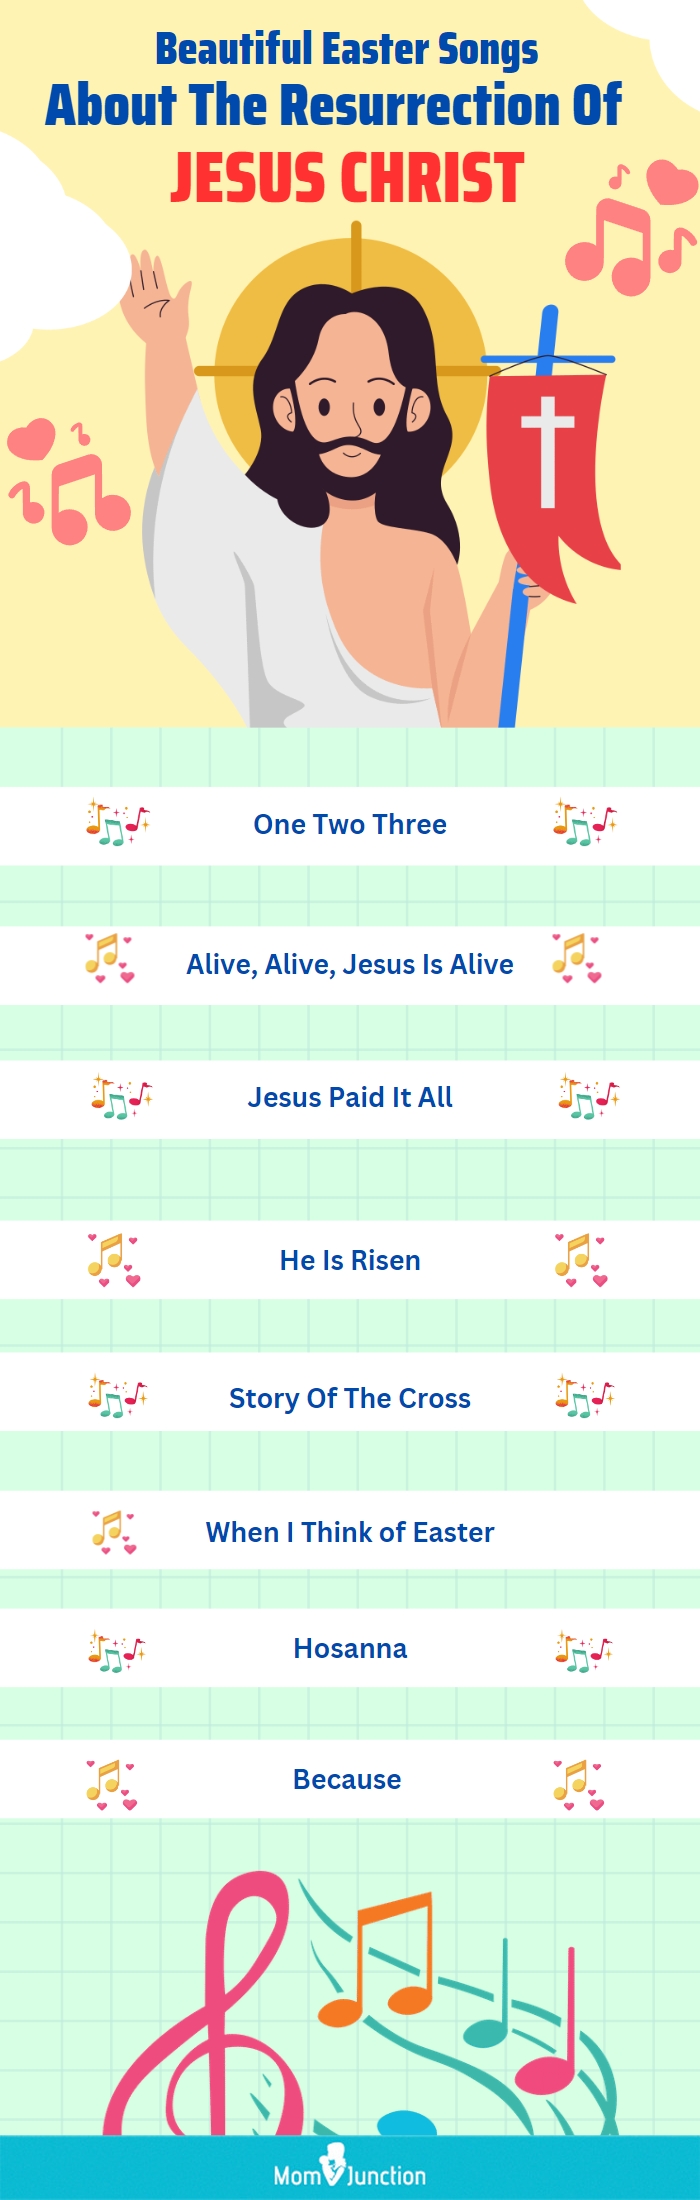 beautiful easter songs about the resurrection of jesus christ (infographic) 